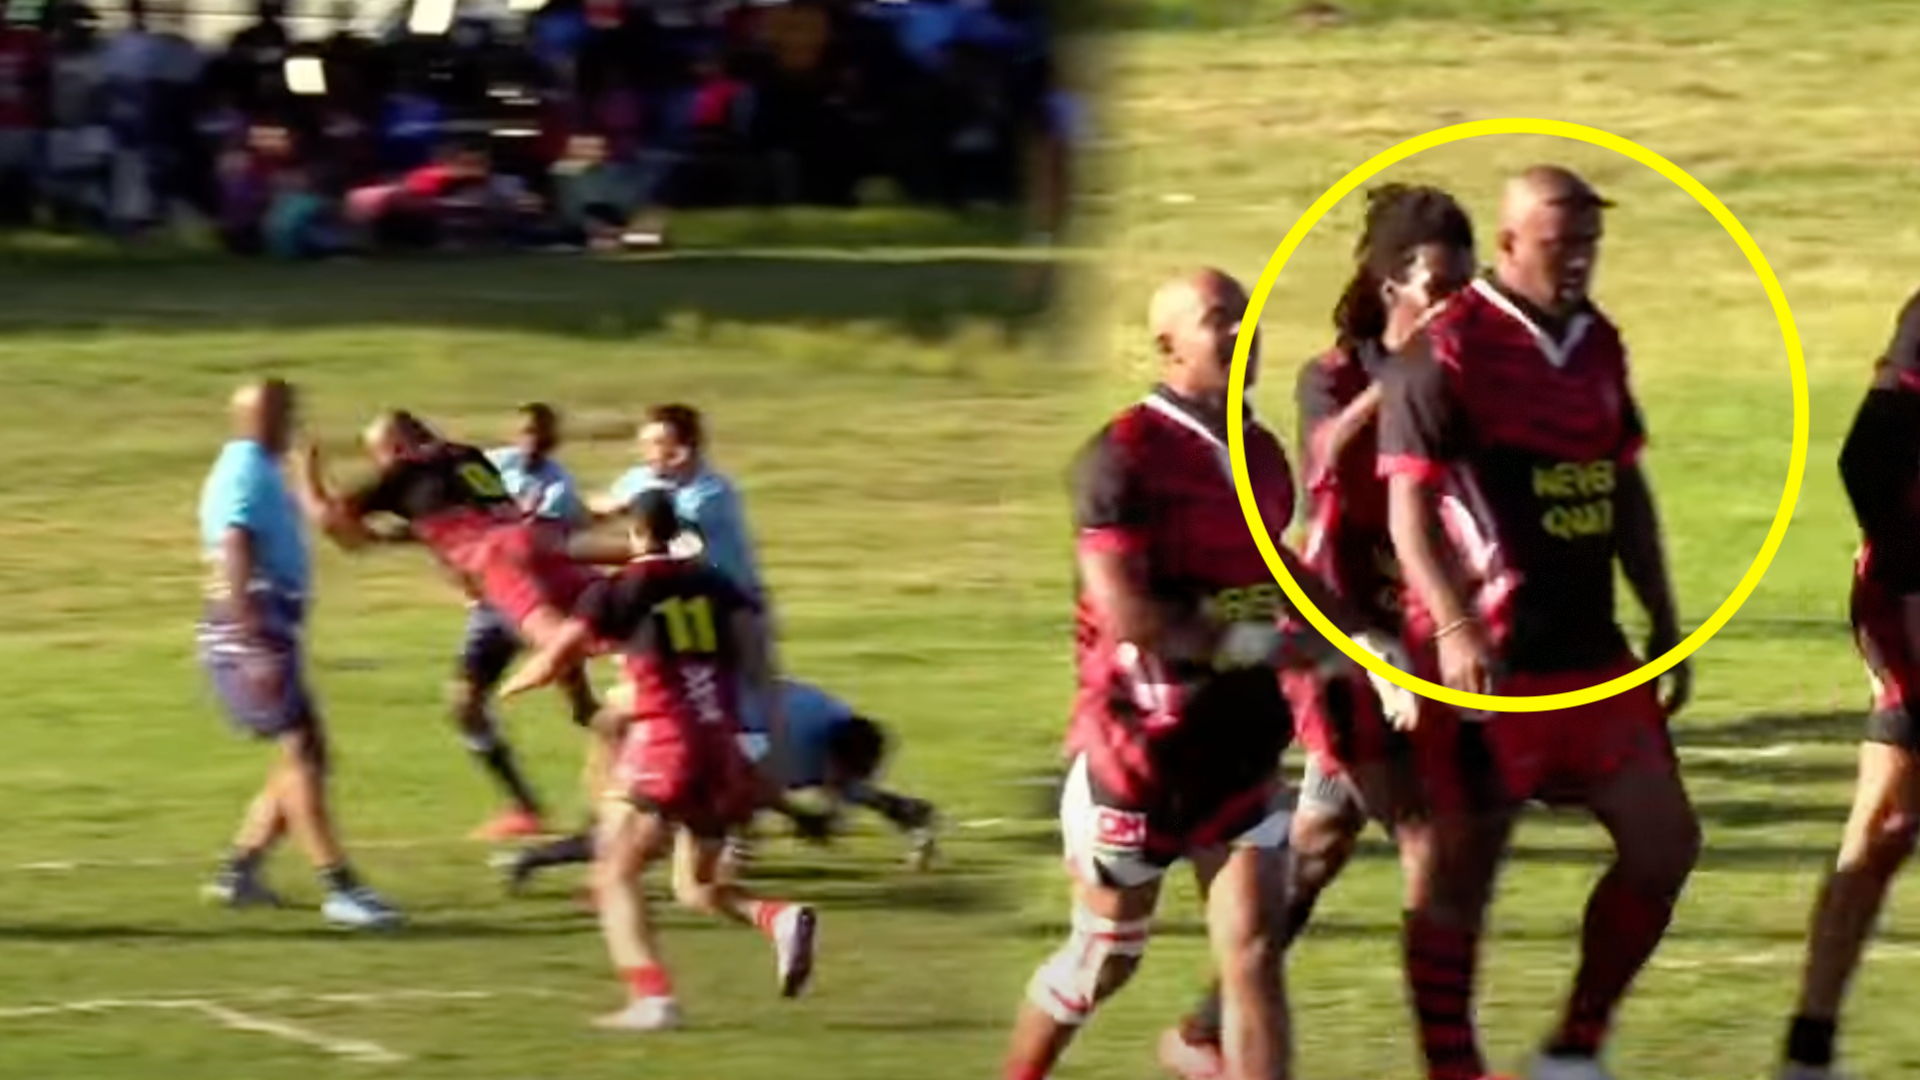 Freakish No8 looks genuinely unstoppable in South African club match